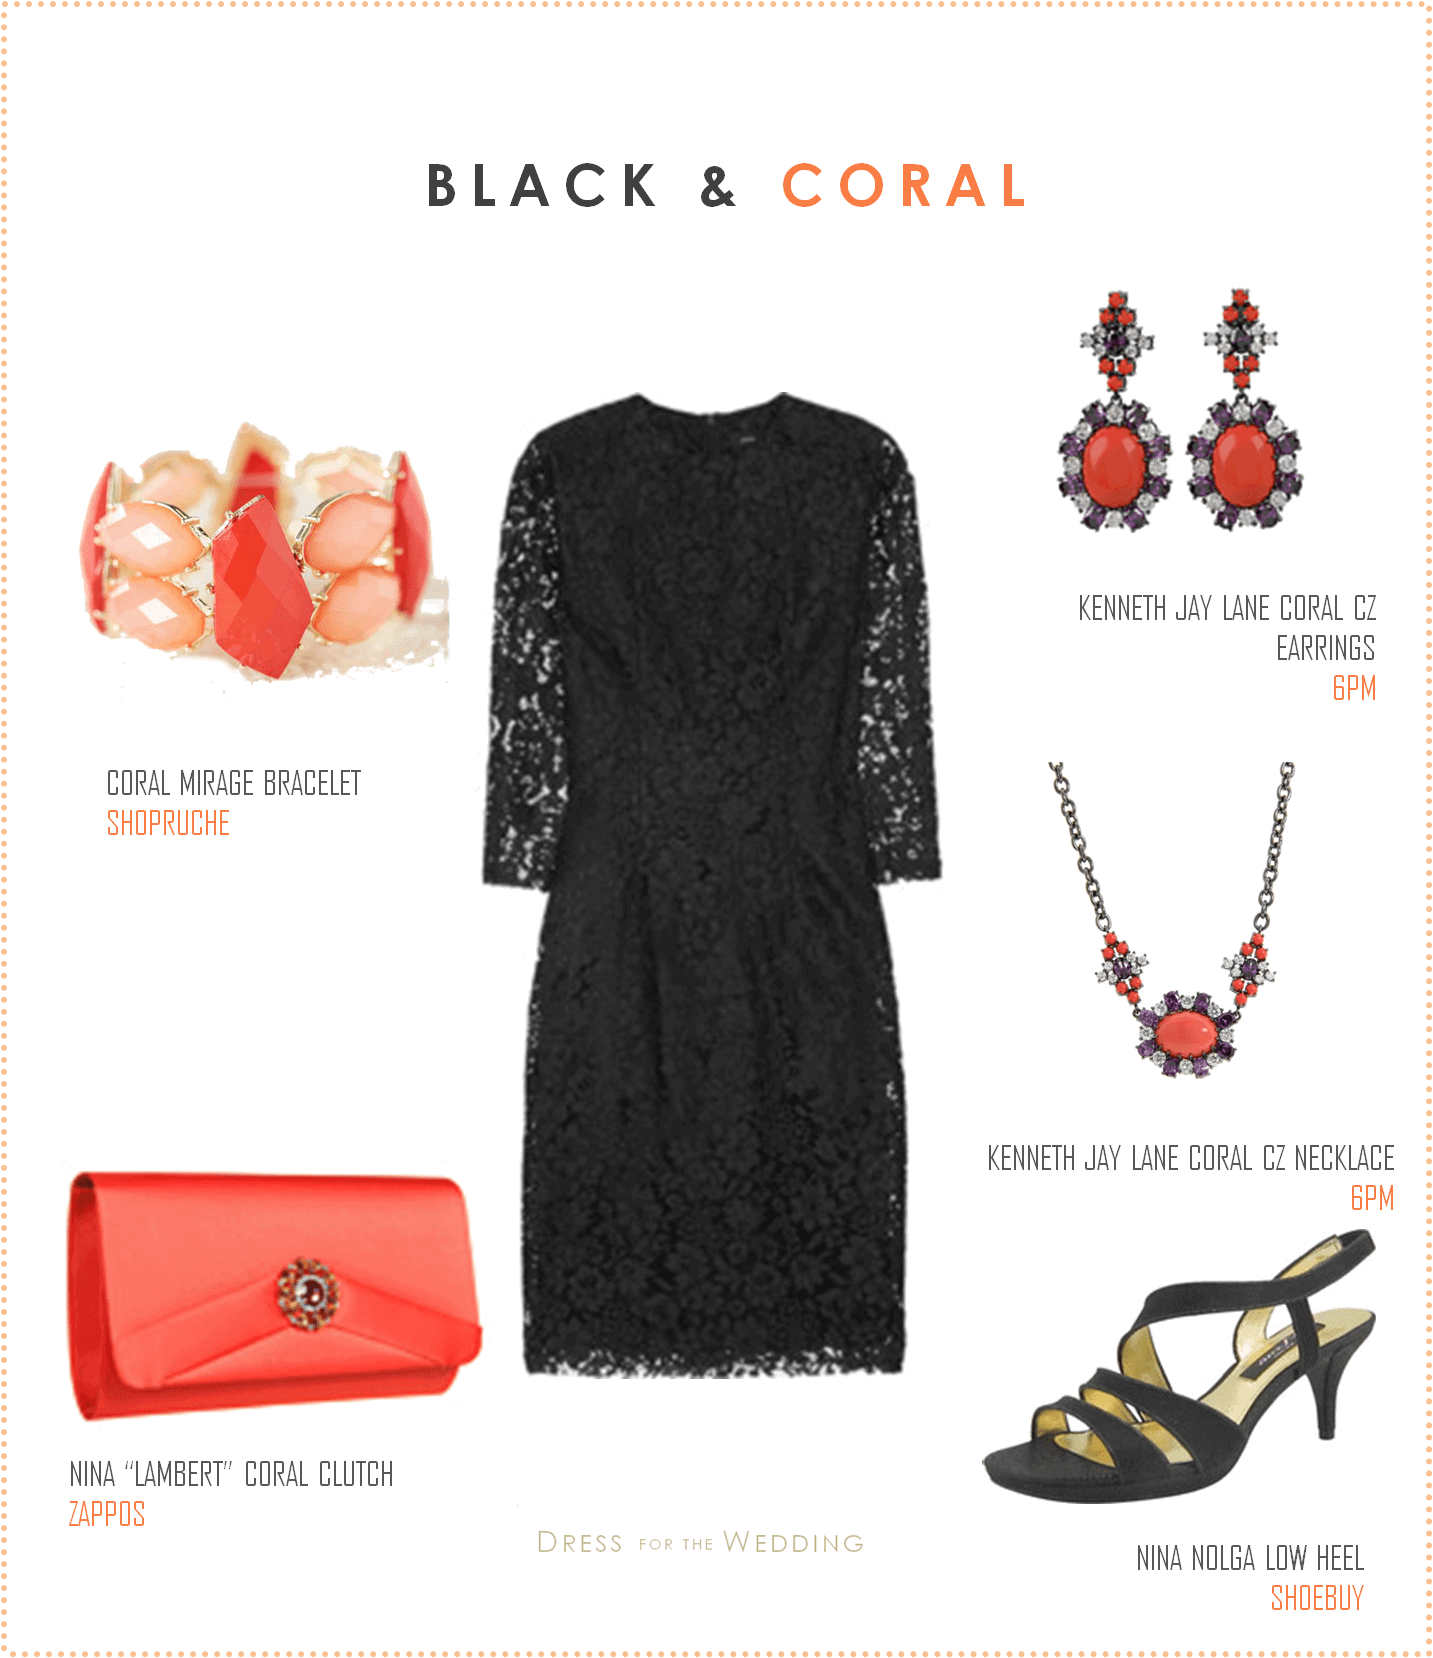 how to accessorize a black dress